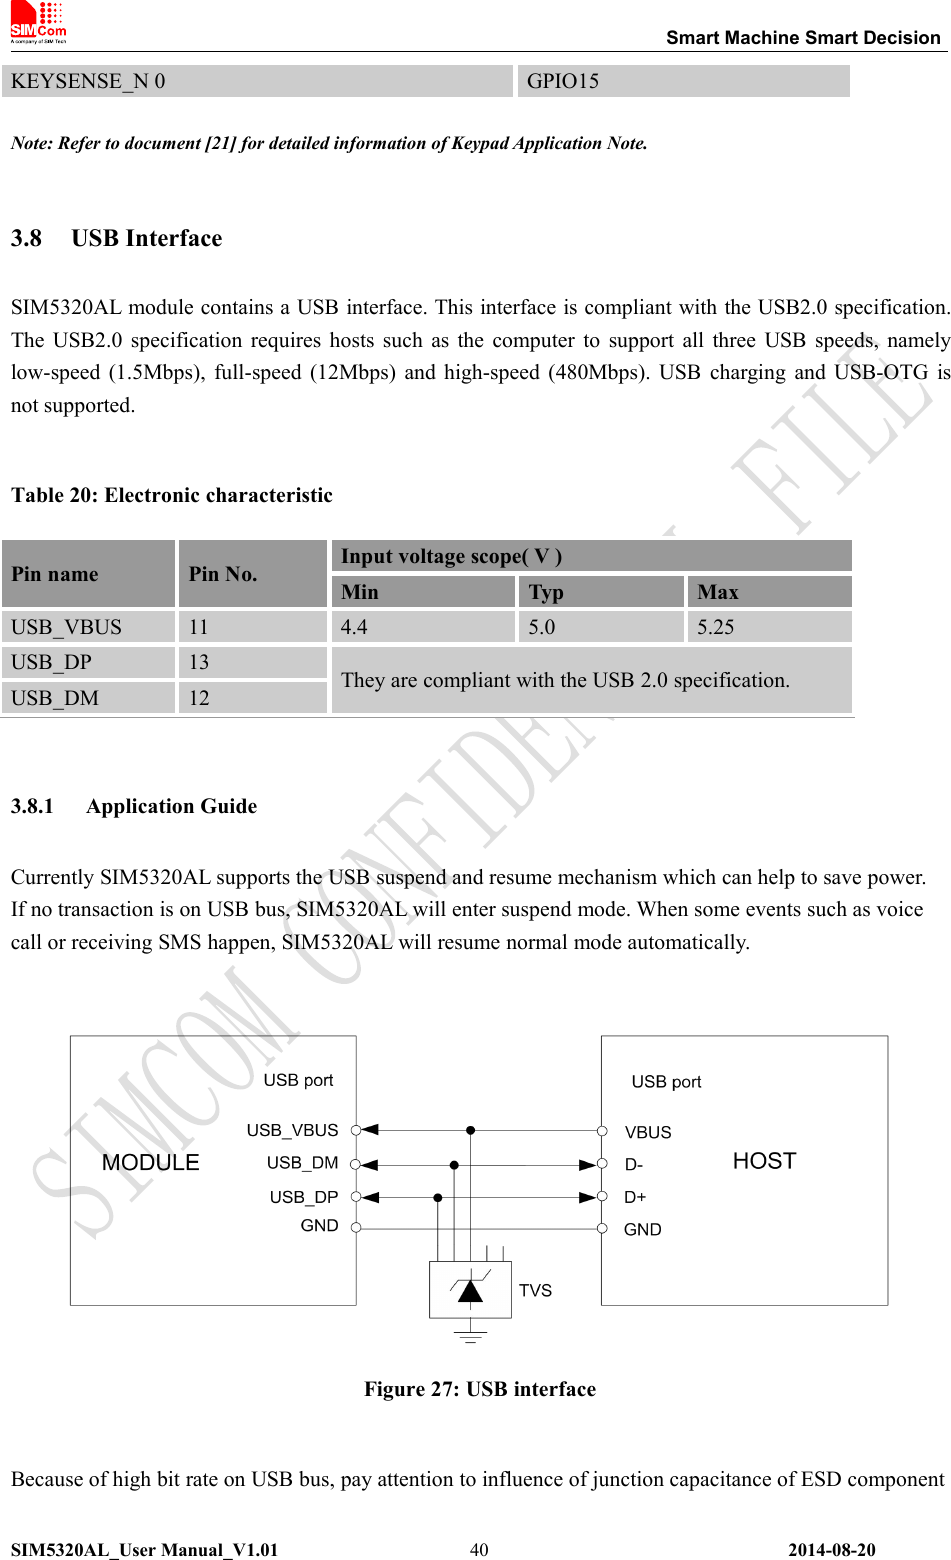 Smart Machine Smart DecisionSIM5320AL_User Manual_V1.01 2014-08-2040KEYSENSE_N 0 GPIO15Note: Refer to document [21] for detailed information of Keypad Application Note.3.8 USB InterfaceSIM5320AL module contains a USB interface. This interface is compliant with the USB2.0 specification.The USB2.0 specification requires hosts such as the computer to support all three USB speeds, namelylow-speed (1.5Mbps), full-speed (12Mbps) and high-speed (480Mbps). USB charging and USB-OTG isnot supported.Table 20: Electronic characteristicPin namePin No.Input voltage scope( V )MinTypMaxUSB_VBUS114.45.05.25USB_DP13They are compliant with the USB 2.0 specification.USB_DM123.8.1 Application GuideCurrently SIM5320AL supports the USB suspend and resume mechanism which can help to save power.If no transaction is on USB bus, SIM5320AL will enter suspend mode. When some events such as voicecall or receiving SMS happen, SIM5320AL will resume normal mode automatically.Figure 27: USB interfaceBecause of high bit rate on USB bus, pay attention to influence of junction capacitance of ESD component